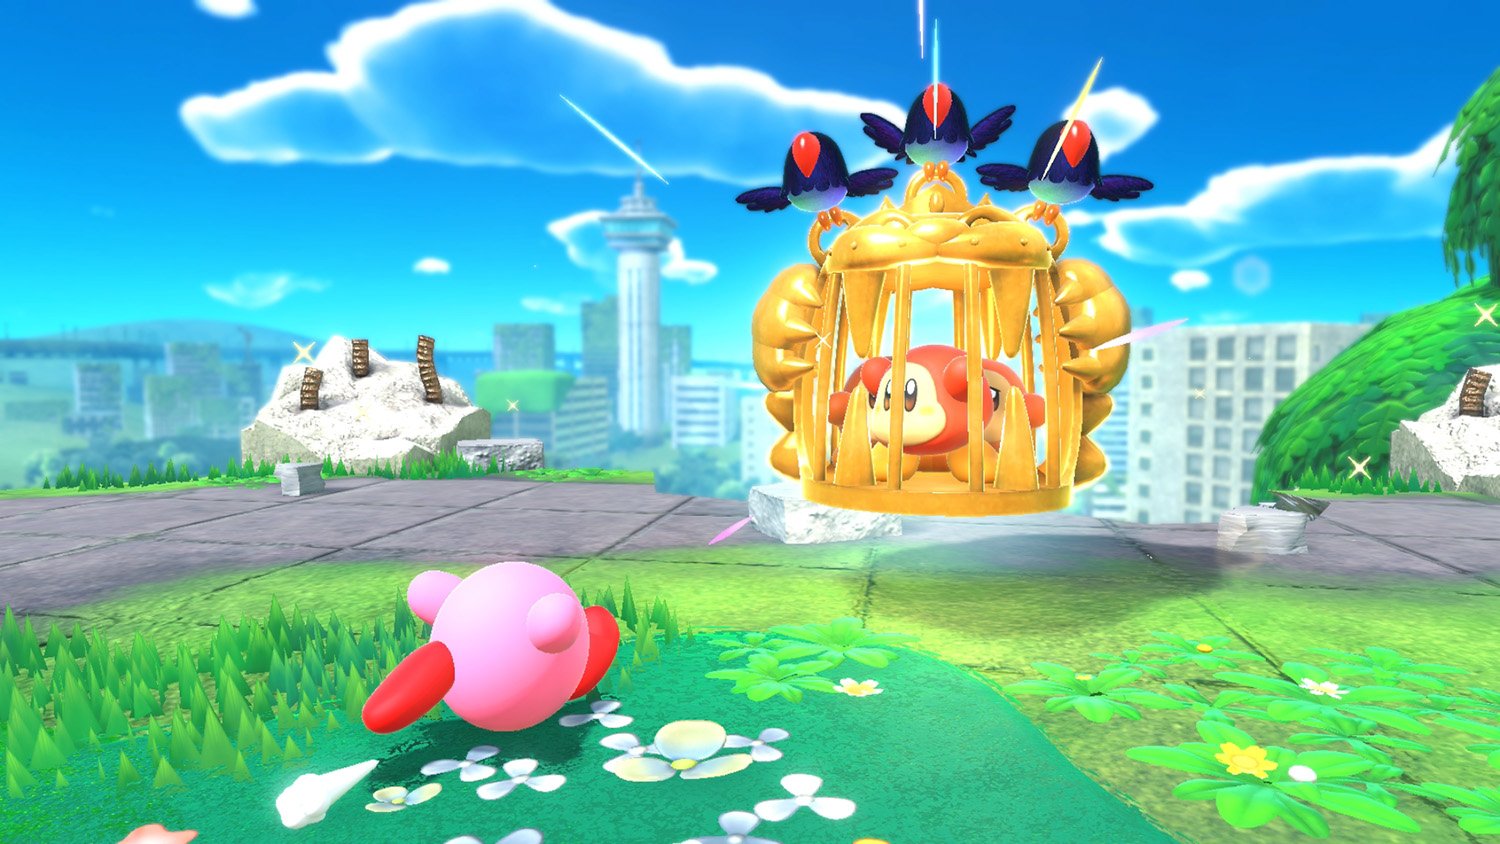 Kirby and the Forgotten Land review, Switch game is not a Mario clone